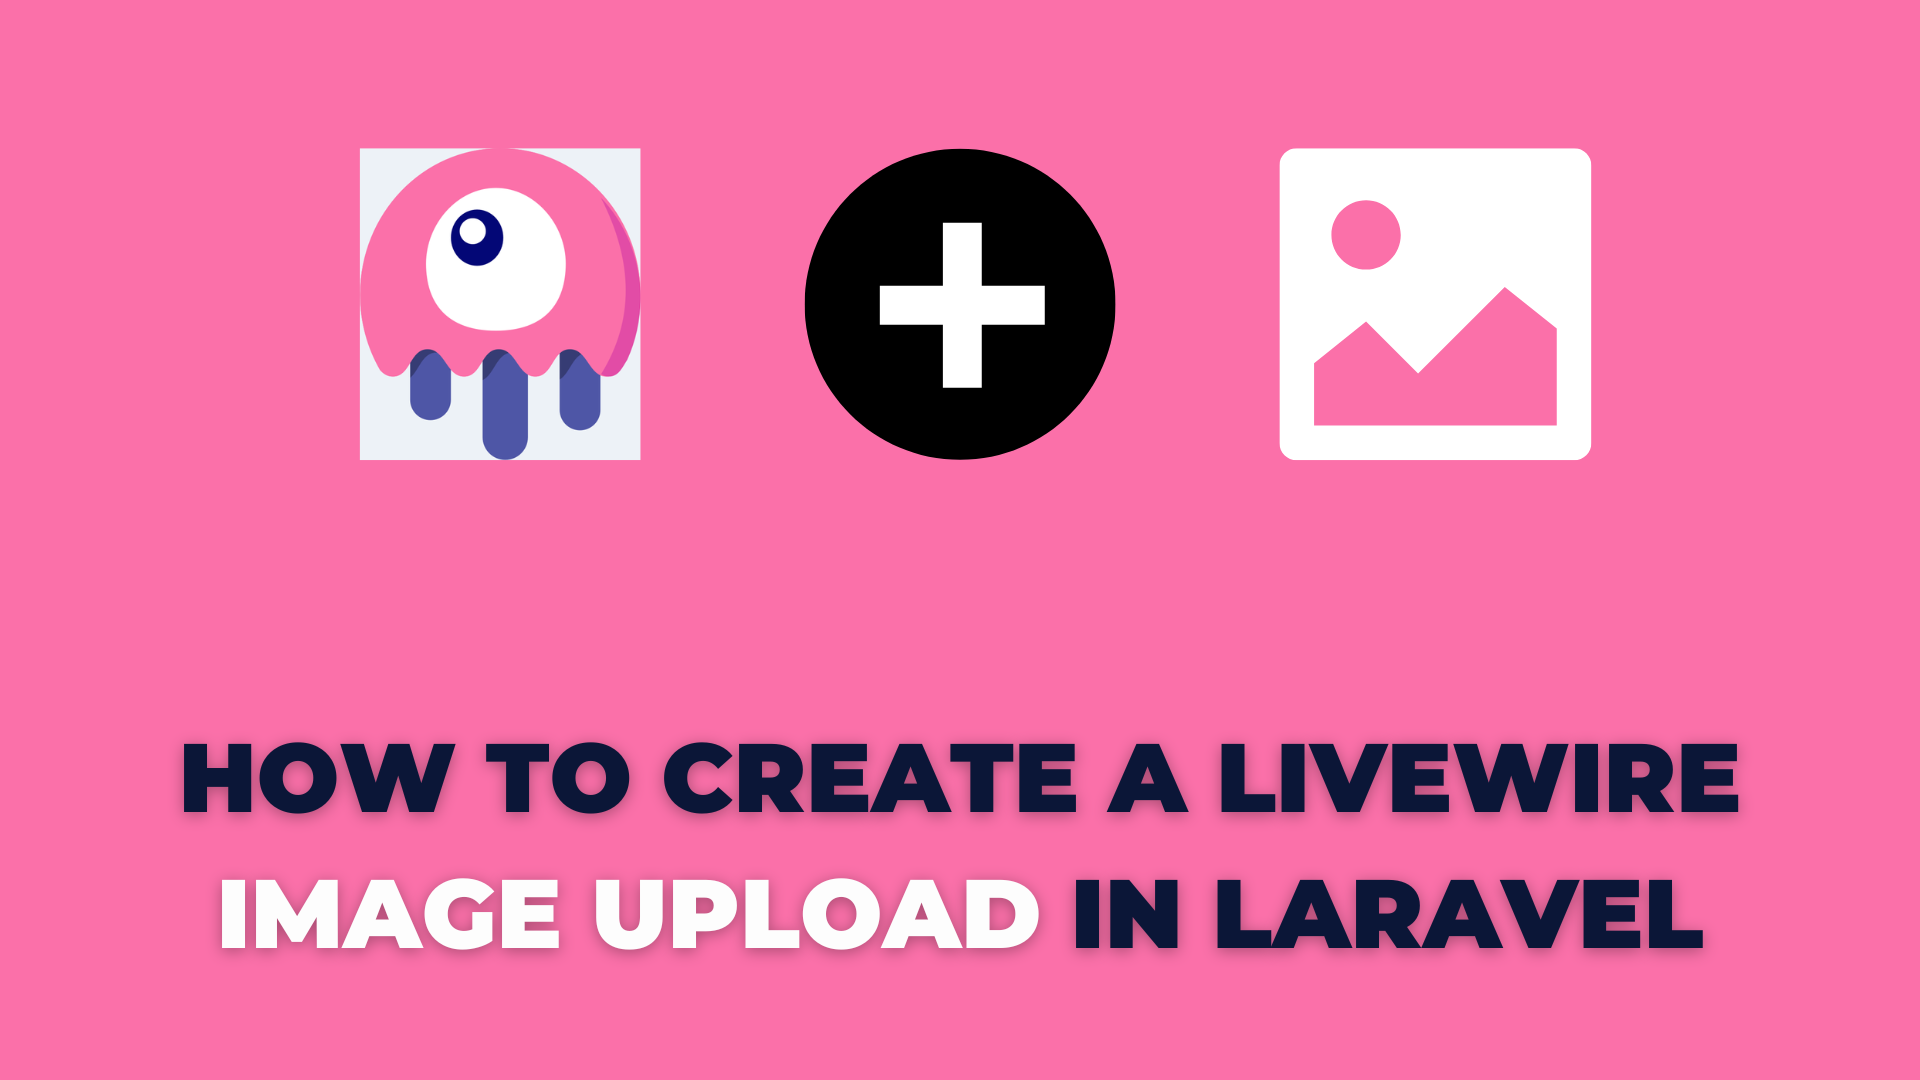 How to create a Livewire Image Upload in Laravel